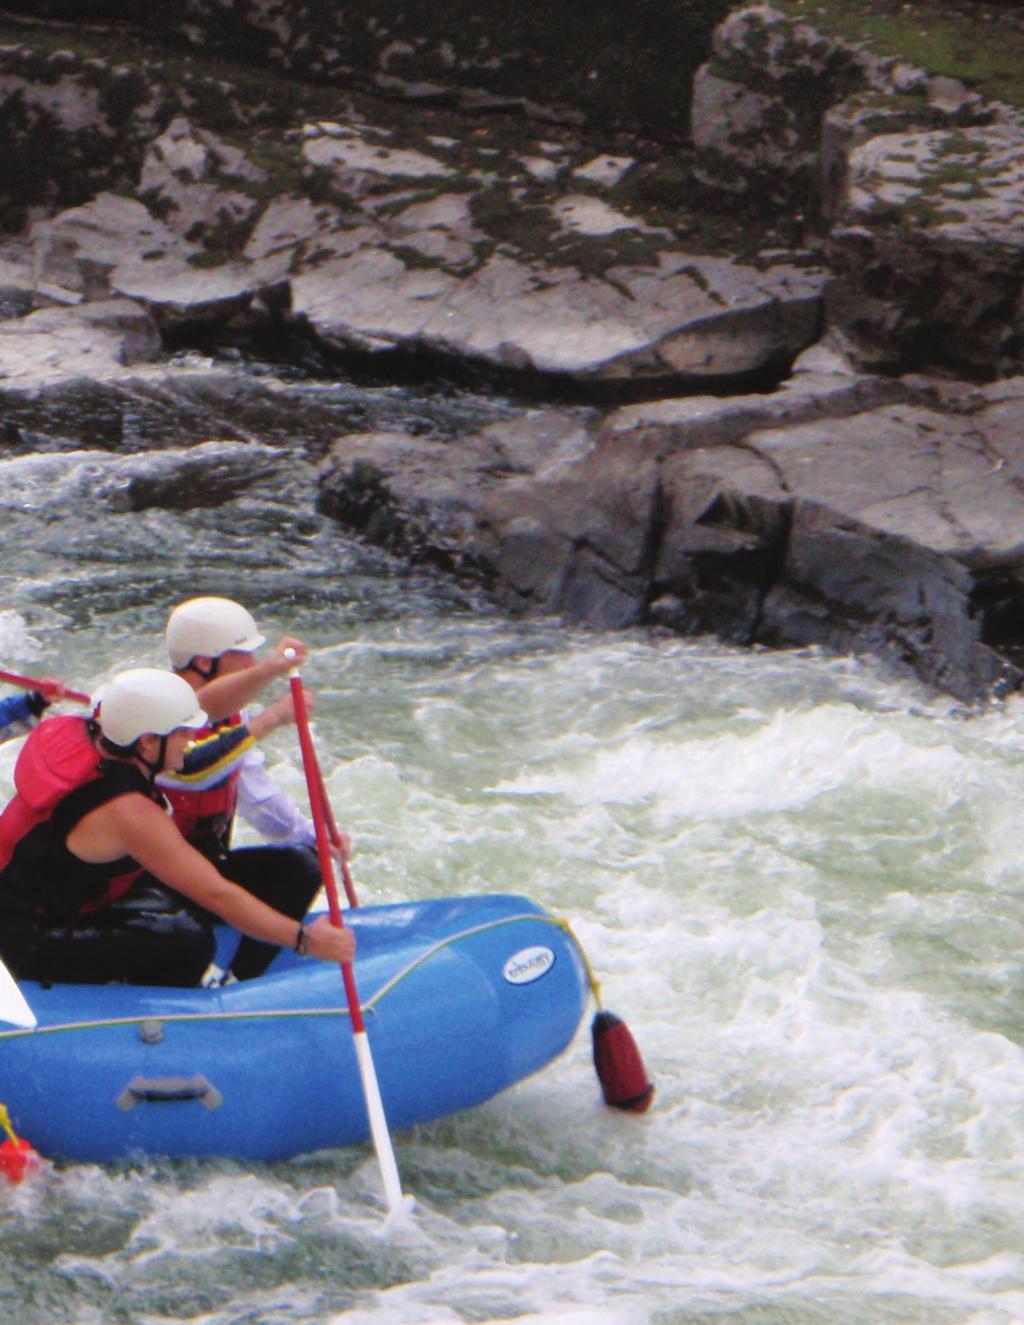 Silver Star Mountaineering May 26-29, 2017 Activity Level: 3 Price: 120 Wenatchee Whitewater Rafting & Riverboarding June 2-4, 2017 *Riverboarding is an option not mandatory Spring Quarter Day Trips